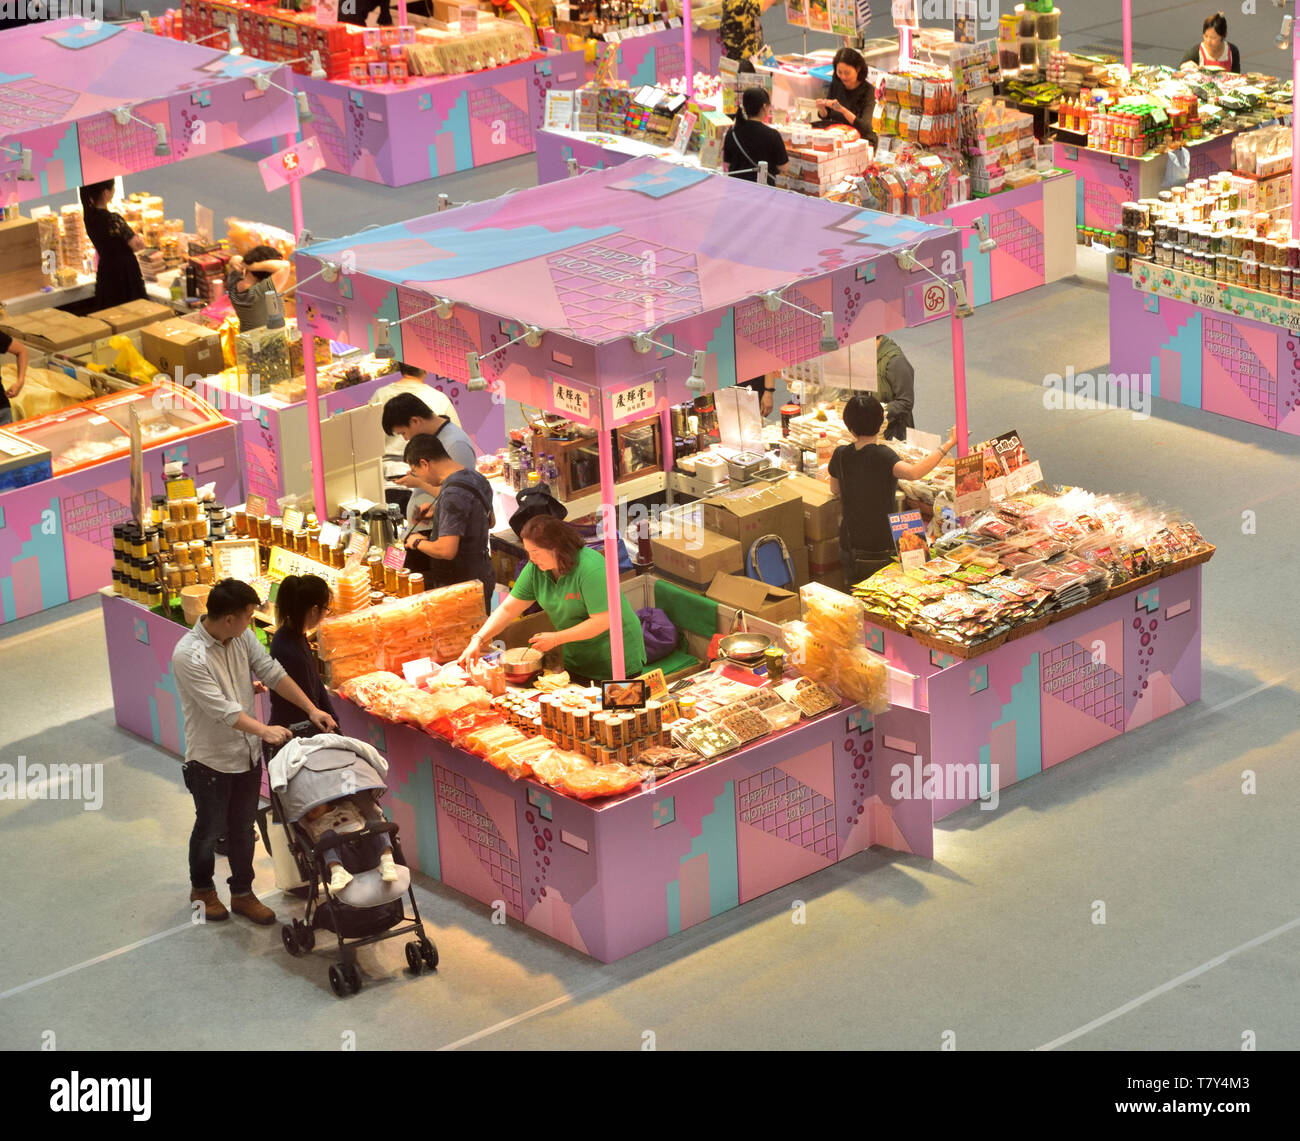 Delicacy booths selling food packs in a shopping arcade on Mother's Day promotion Stock Photo